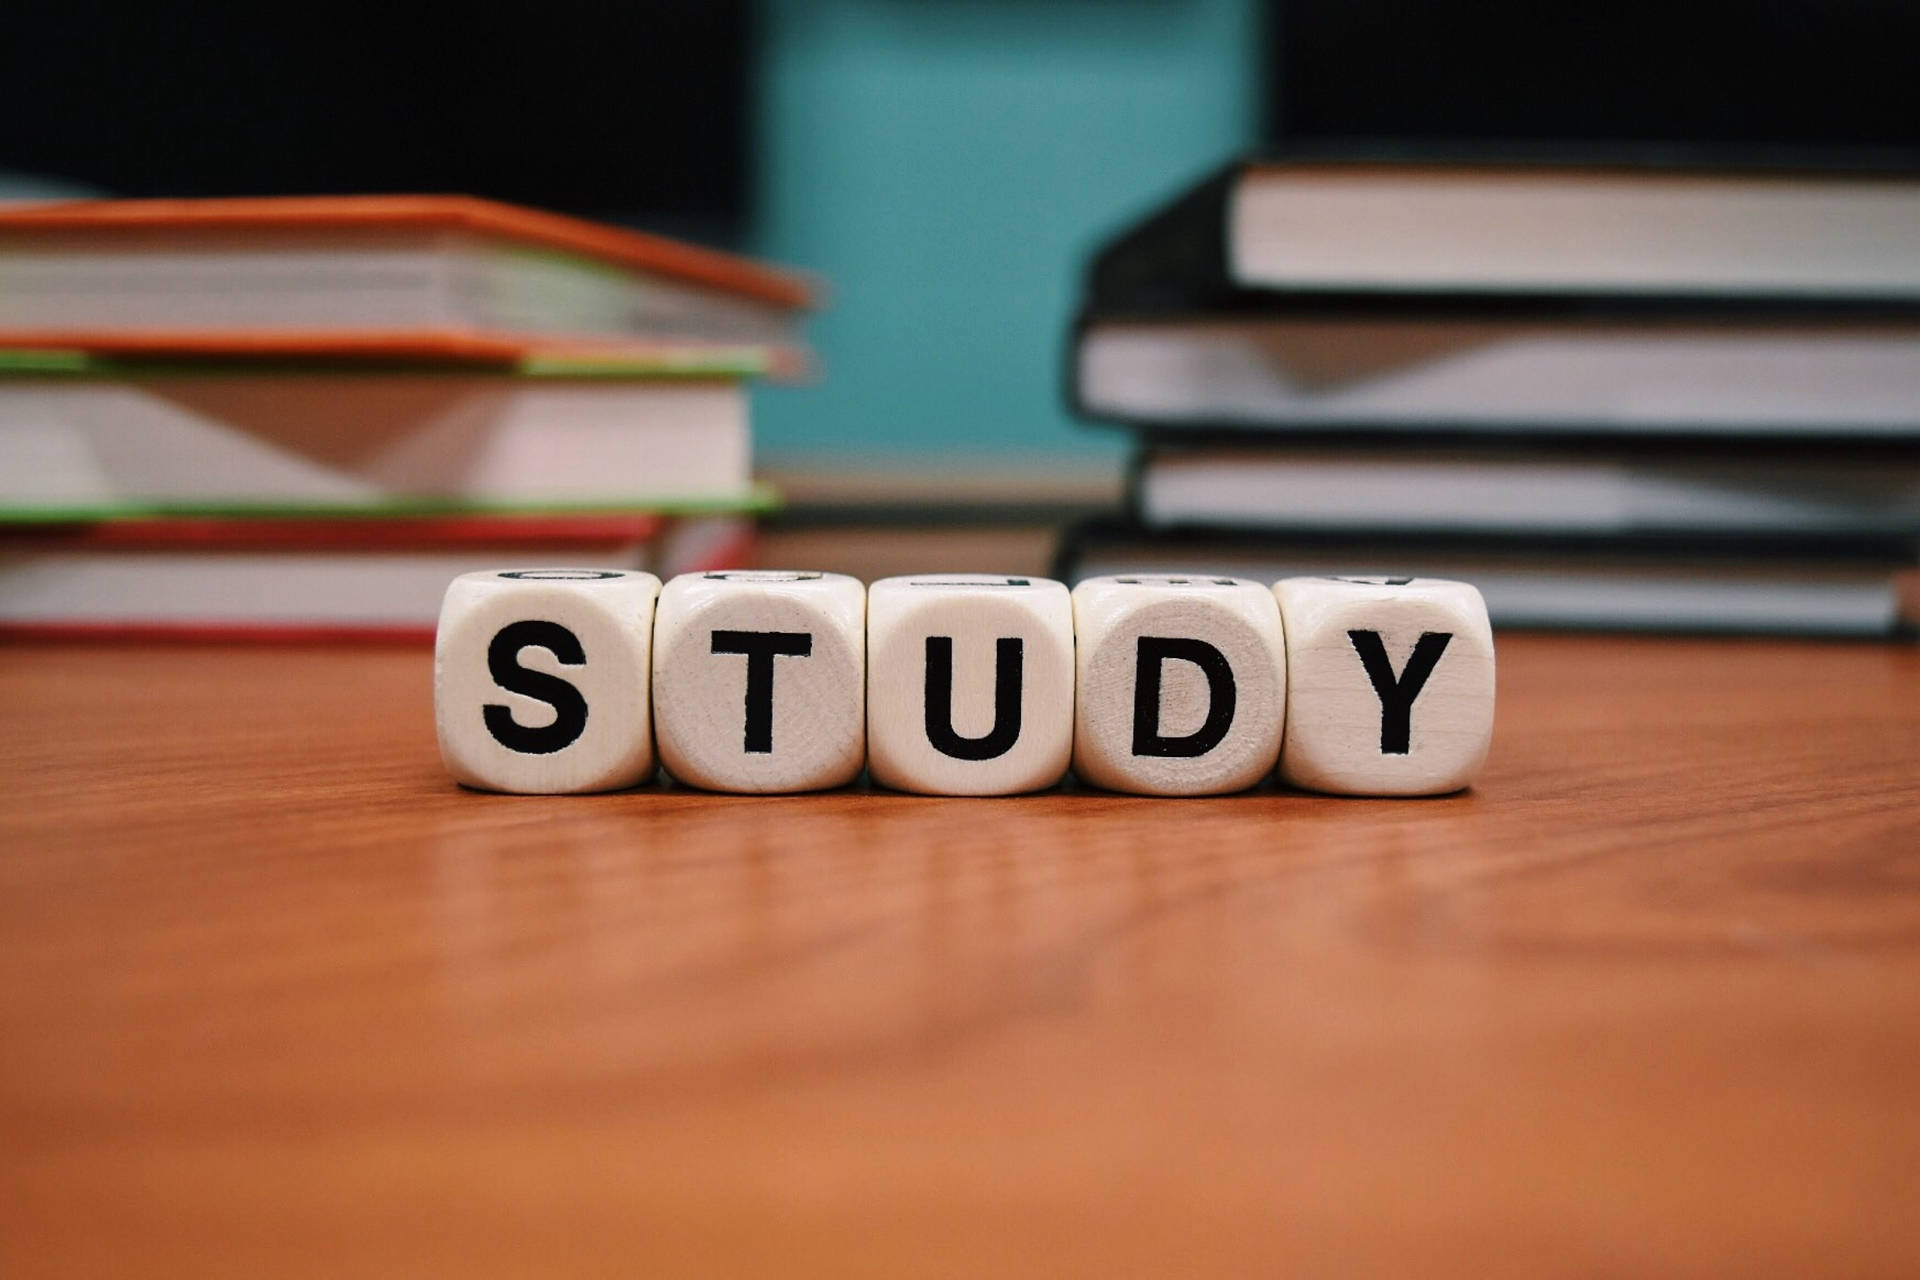 Study Wallpaper Images, HD Pictures For Free Vectors Download - Lovepik.com